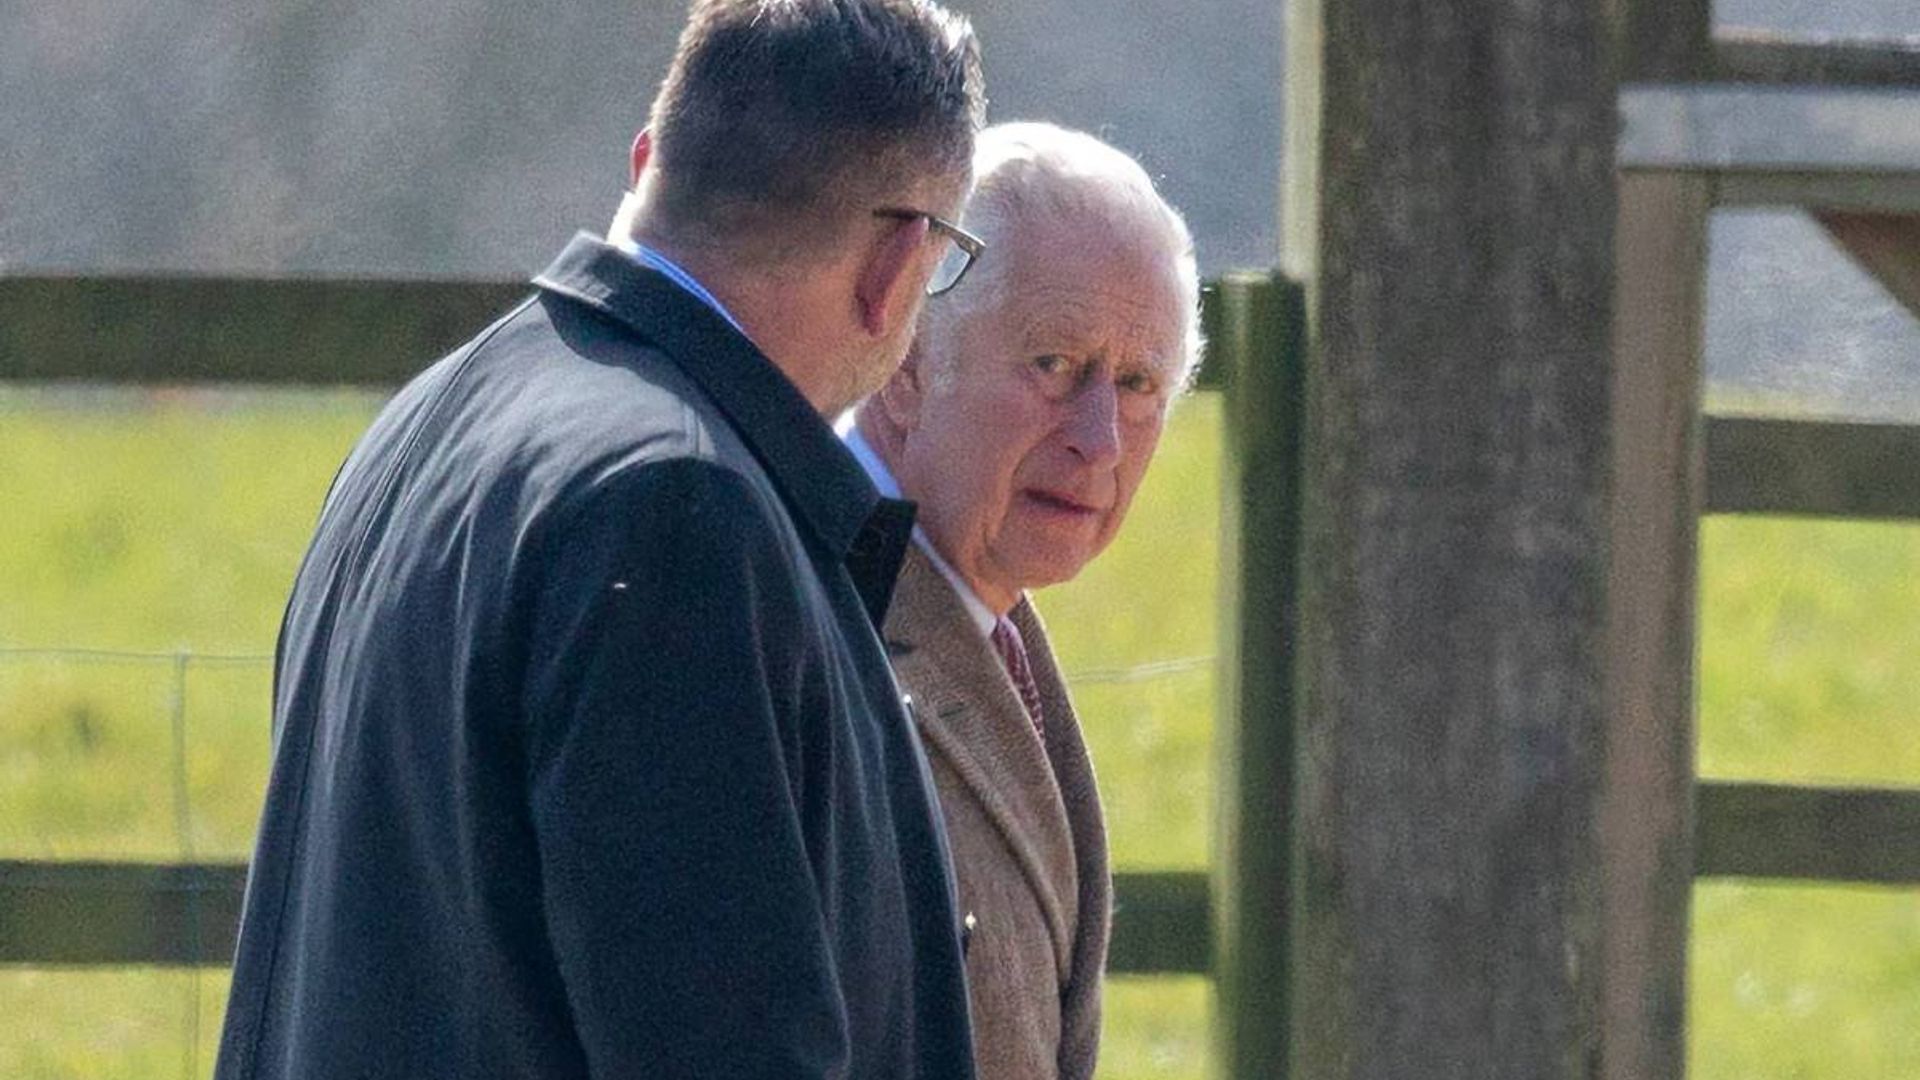 Prince Charles attends church at Sandringham following emotional occasion